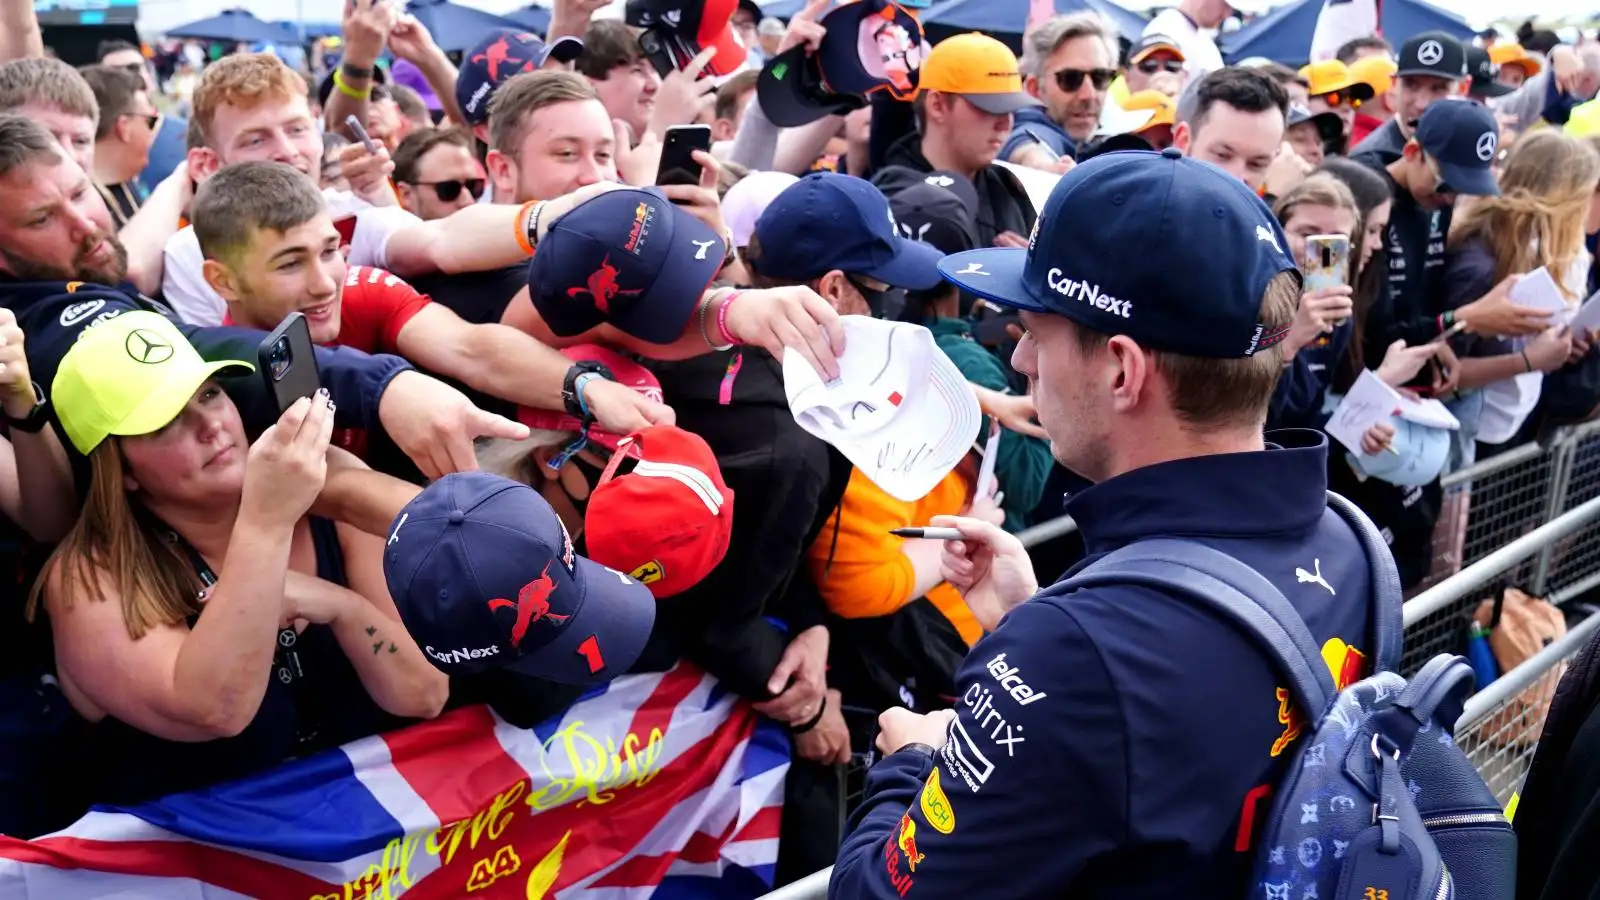 Max Verstappen, Red Bull, signs merchandise for fans. England, July 2022.